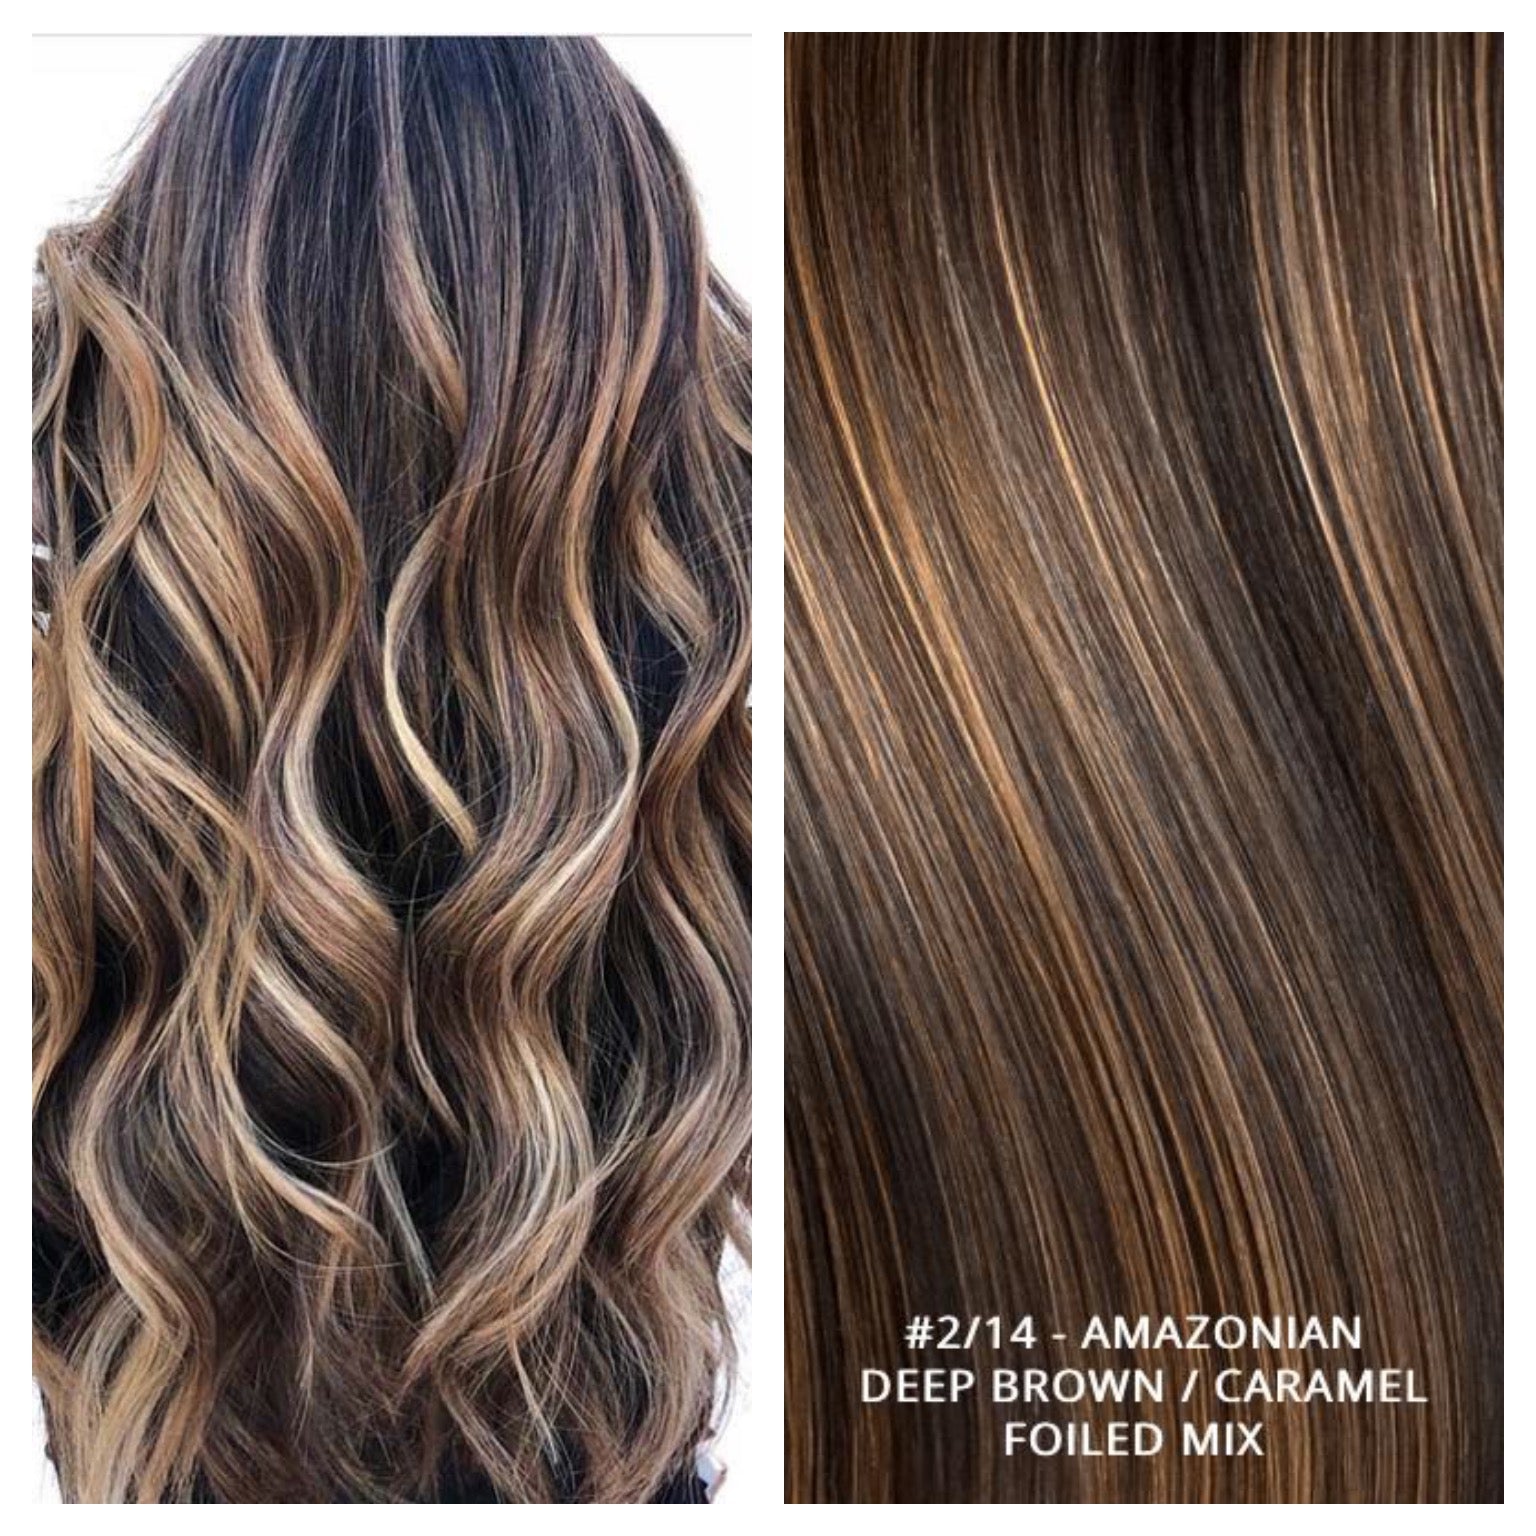 RUSSIAN WEFT WEAVE HAIR EXTENSIONS HIGHLIGHTS #2/14 - AMAZONIAN - DEEP BROWN / CARAMEL FOILED MIX